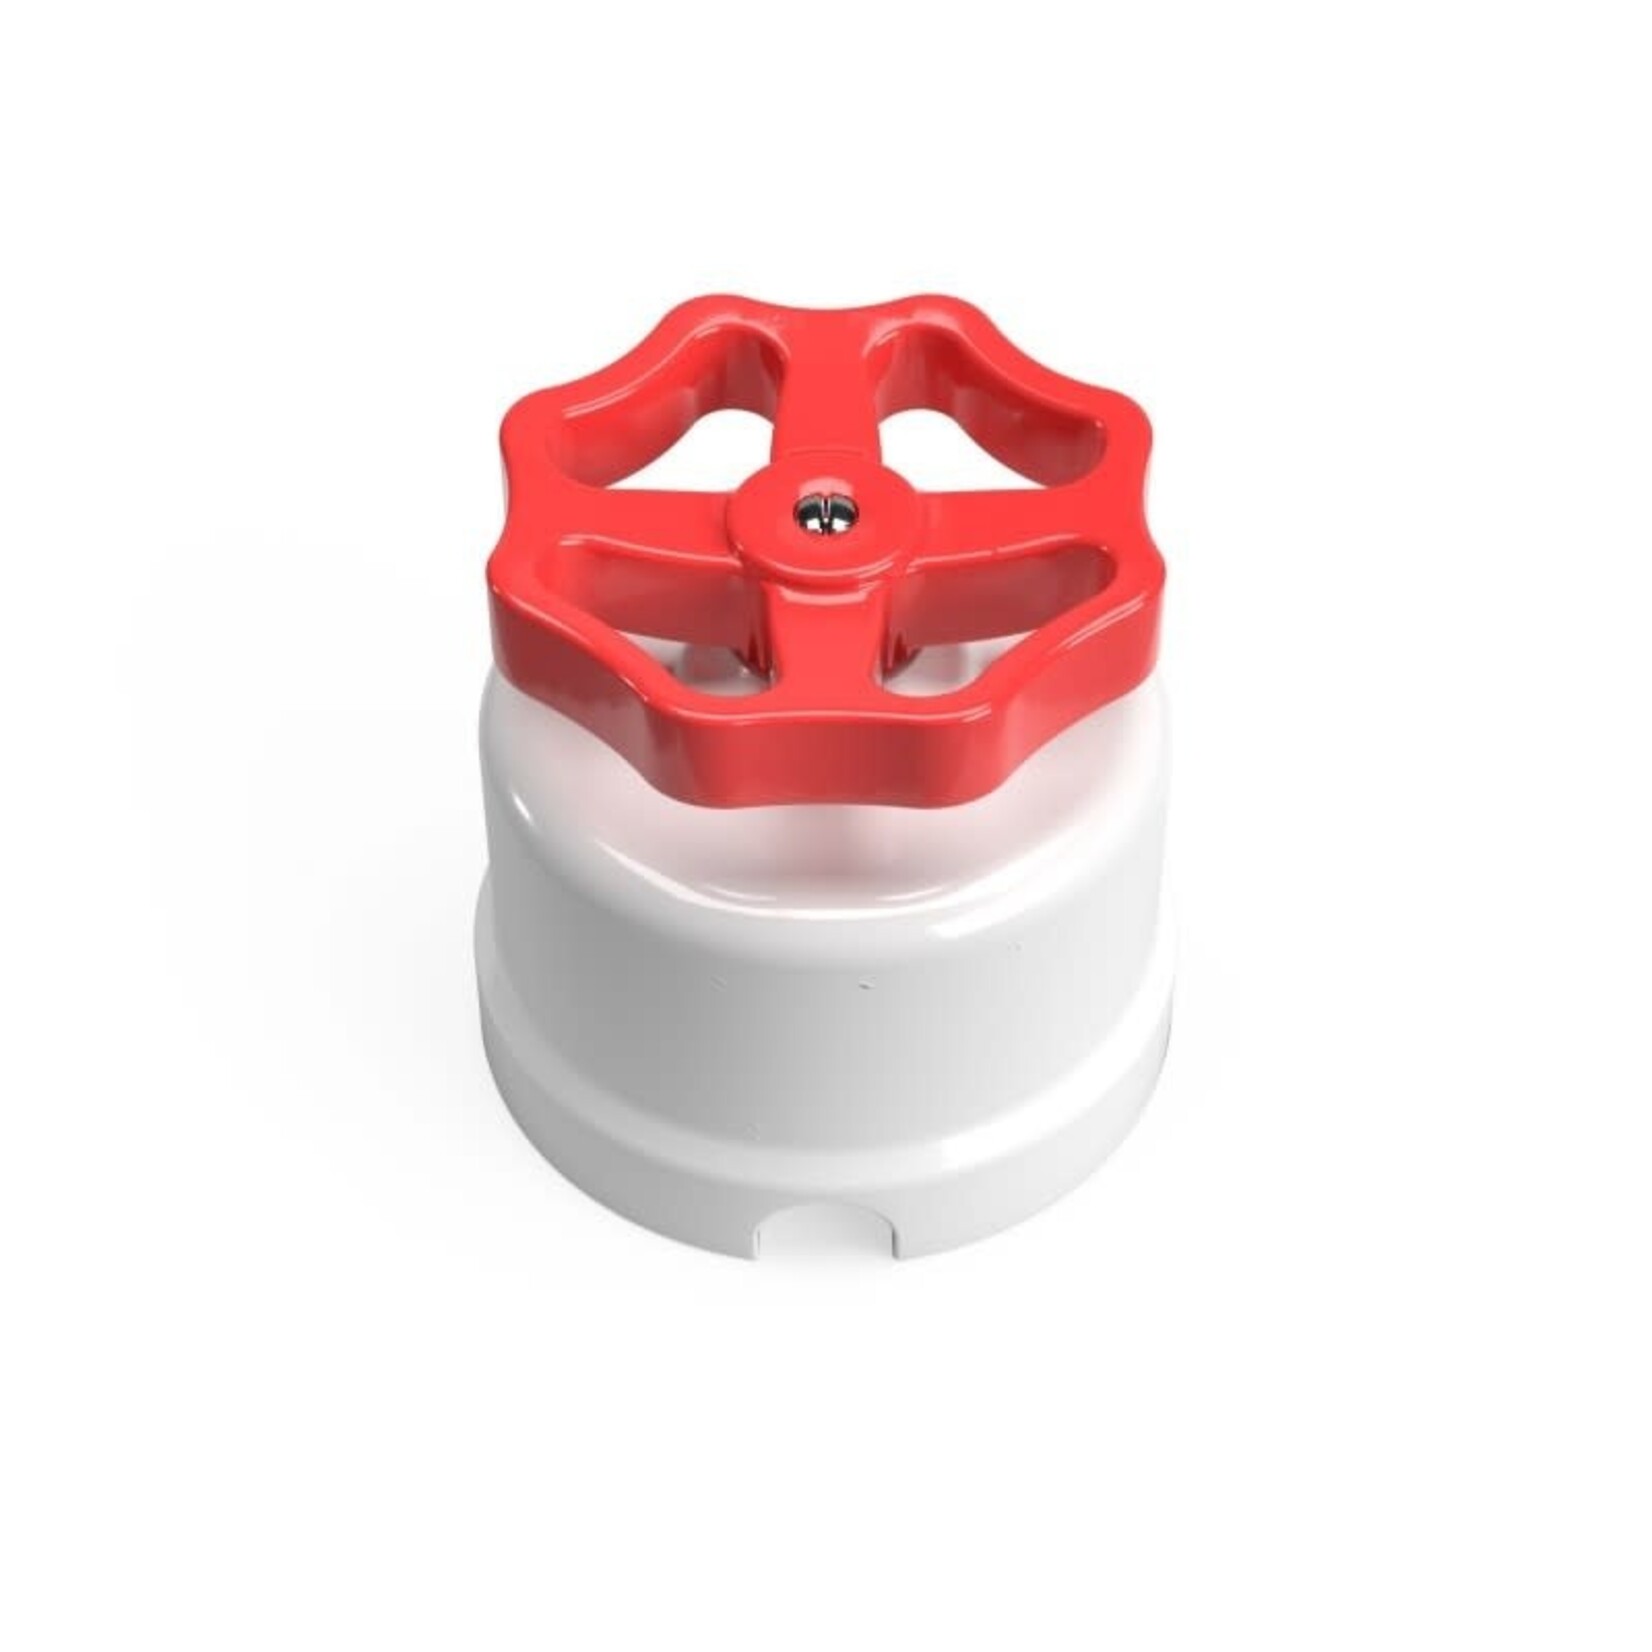 CCIT Switch/Diverter in white porcelain with RED knob